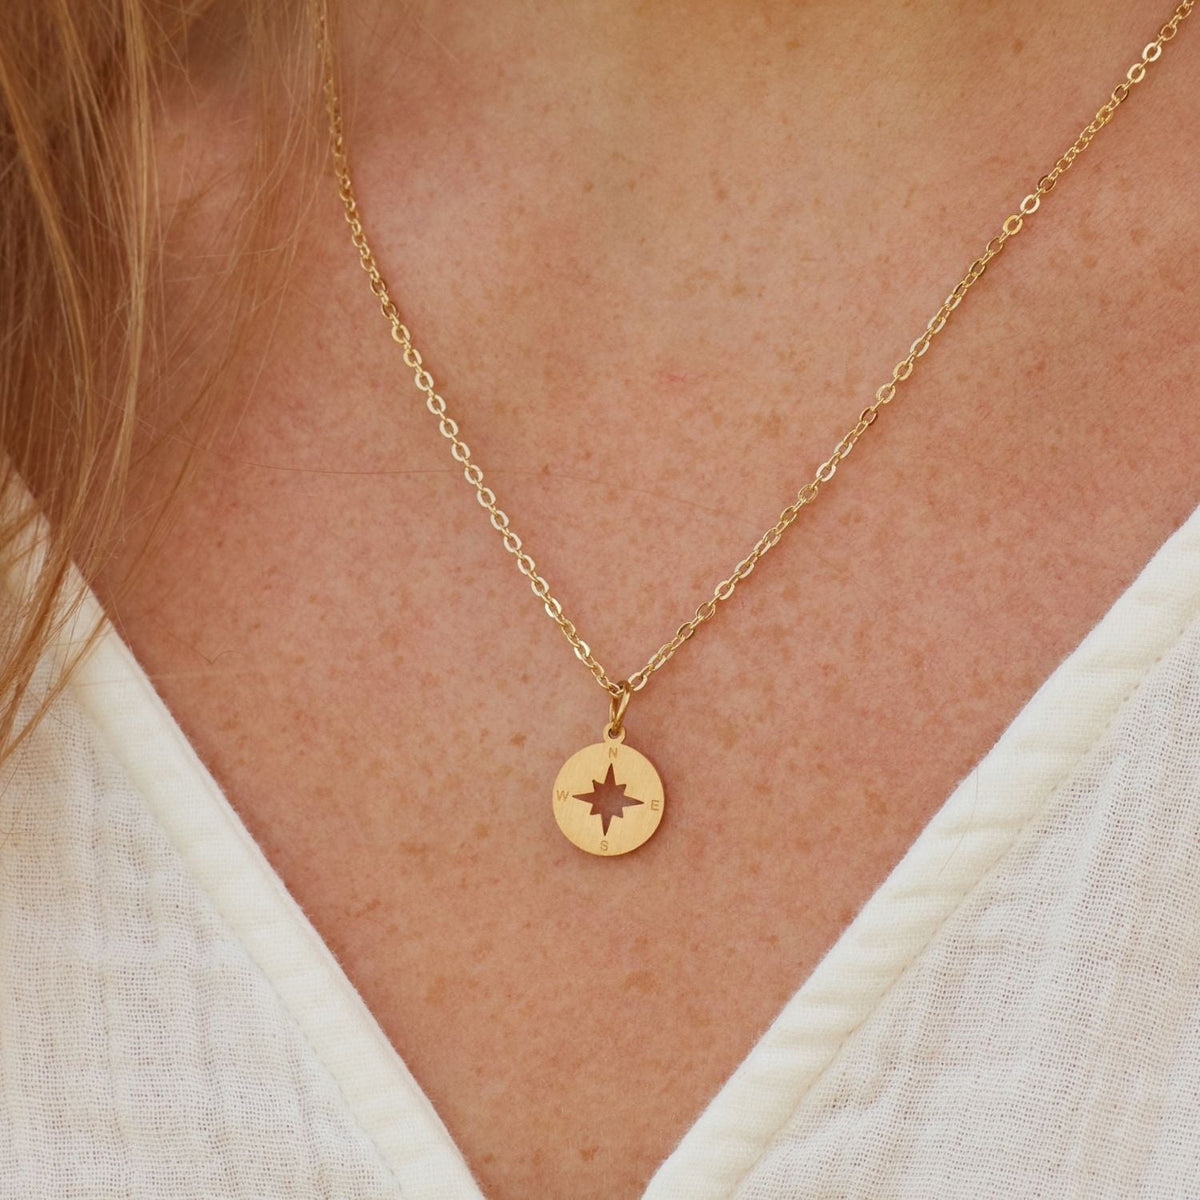 To My Mom on my Wedding Day (From Groom) | Forever Your Little Boy | Compass Necklace